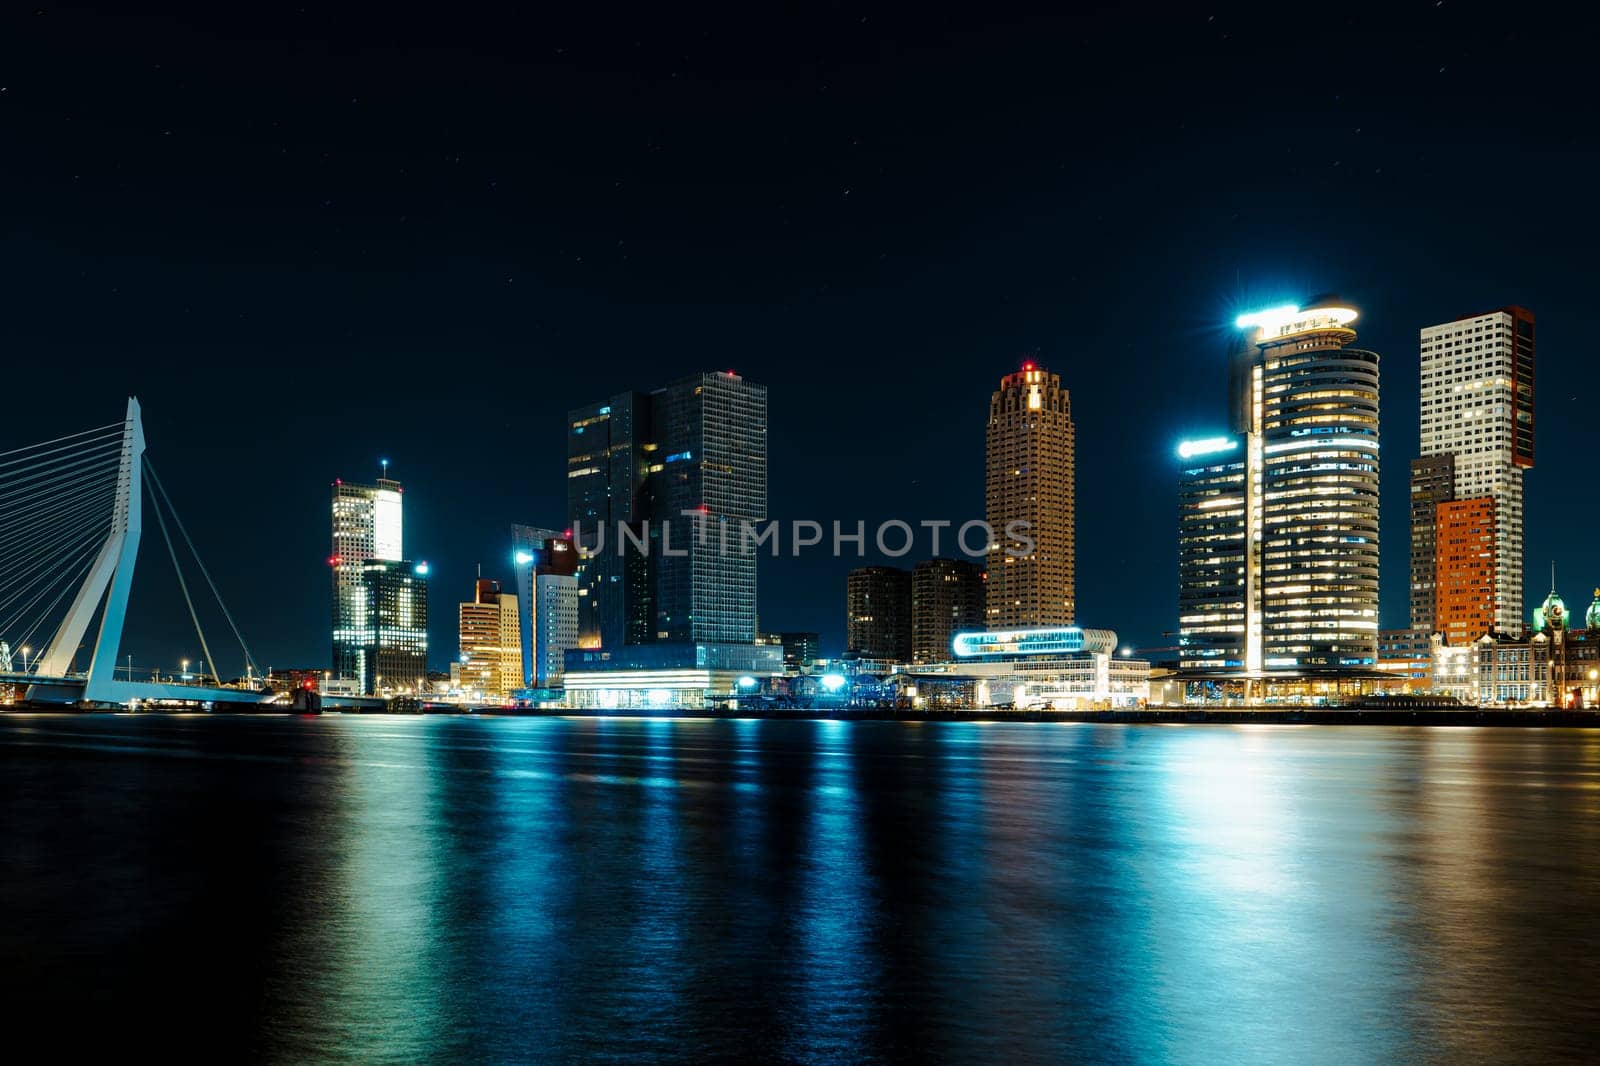 Enchanting Night Panorama of Rotterdam with Modern High-Rise Architecture and Starry Night Sky by PhotoTime